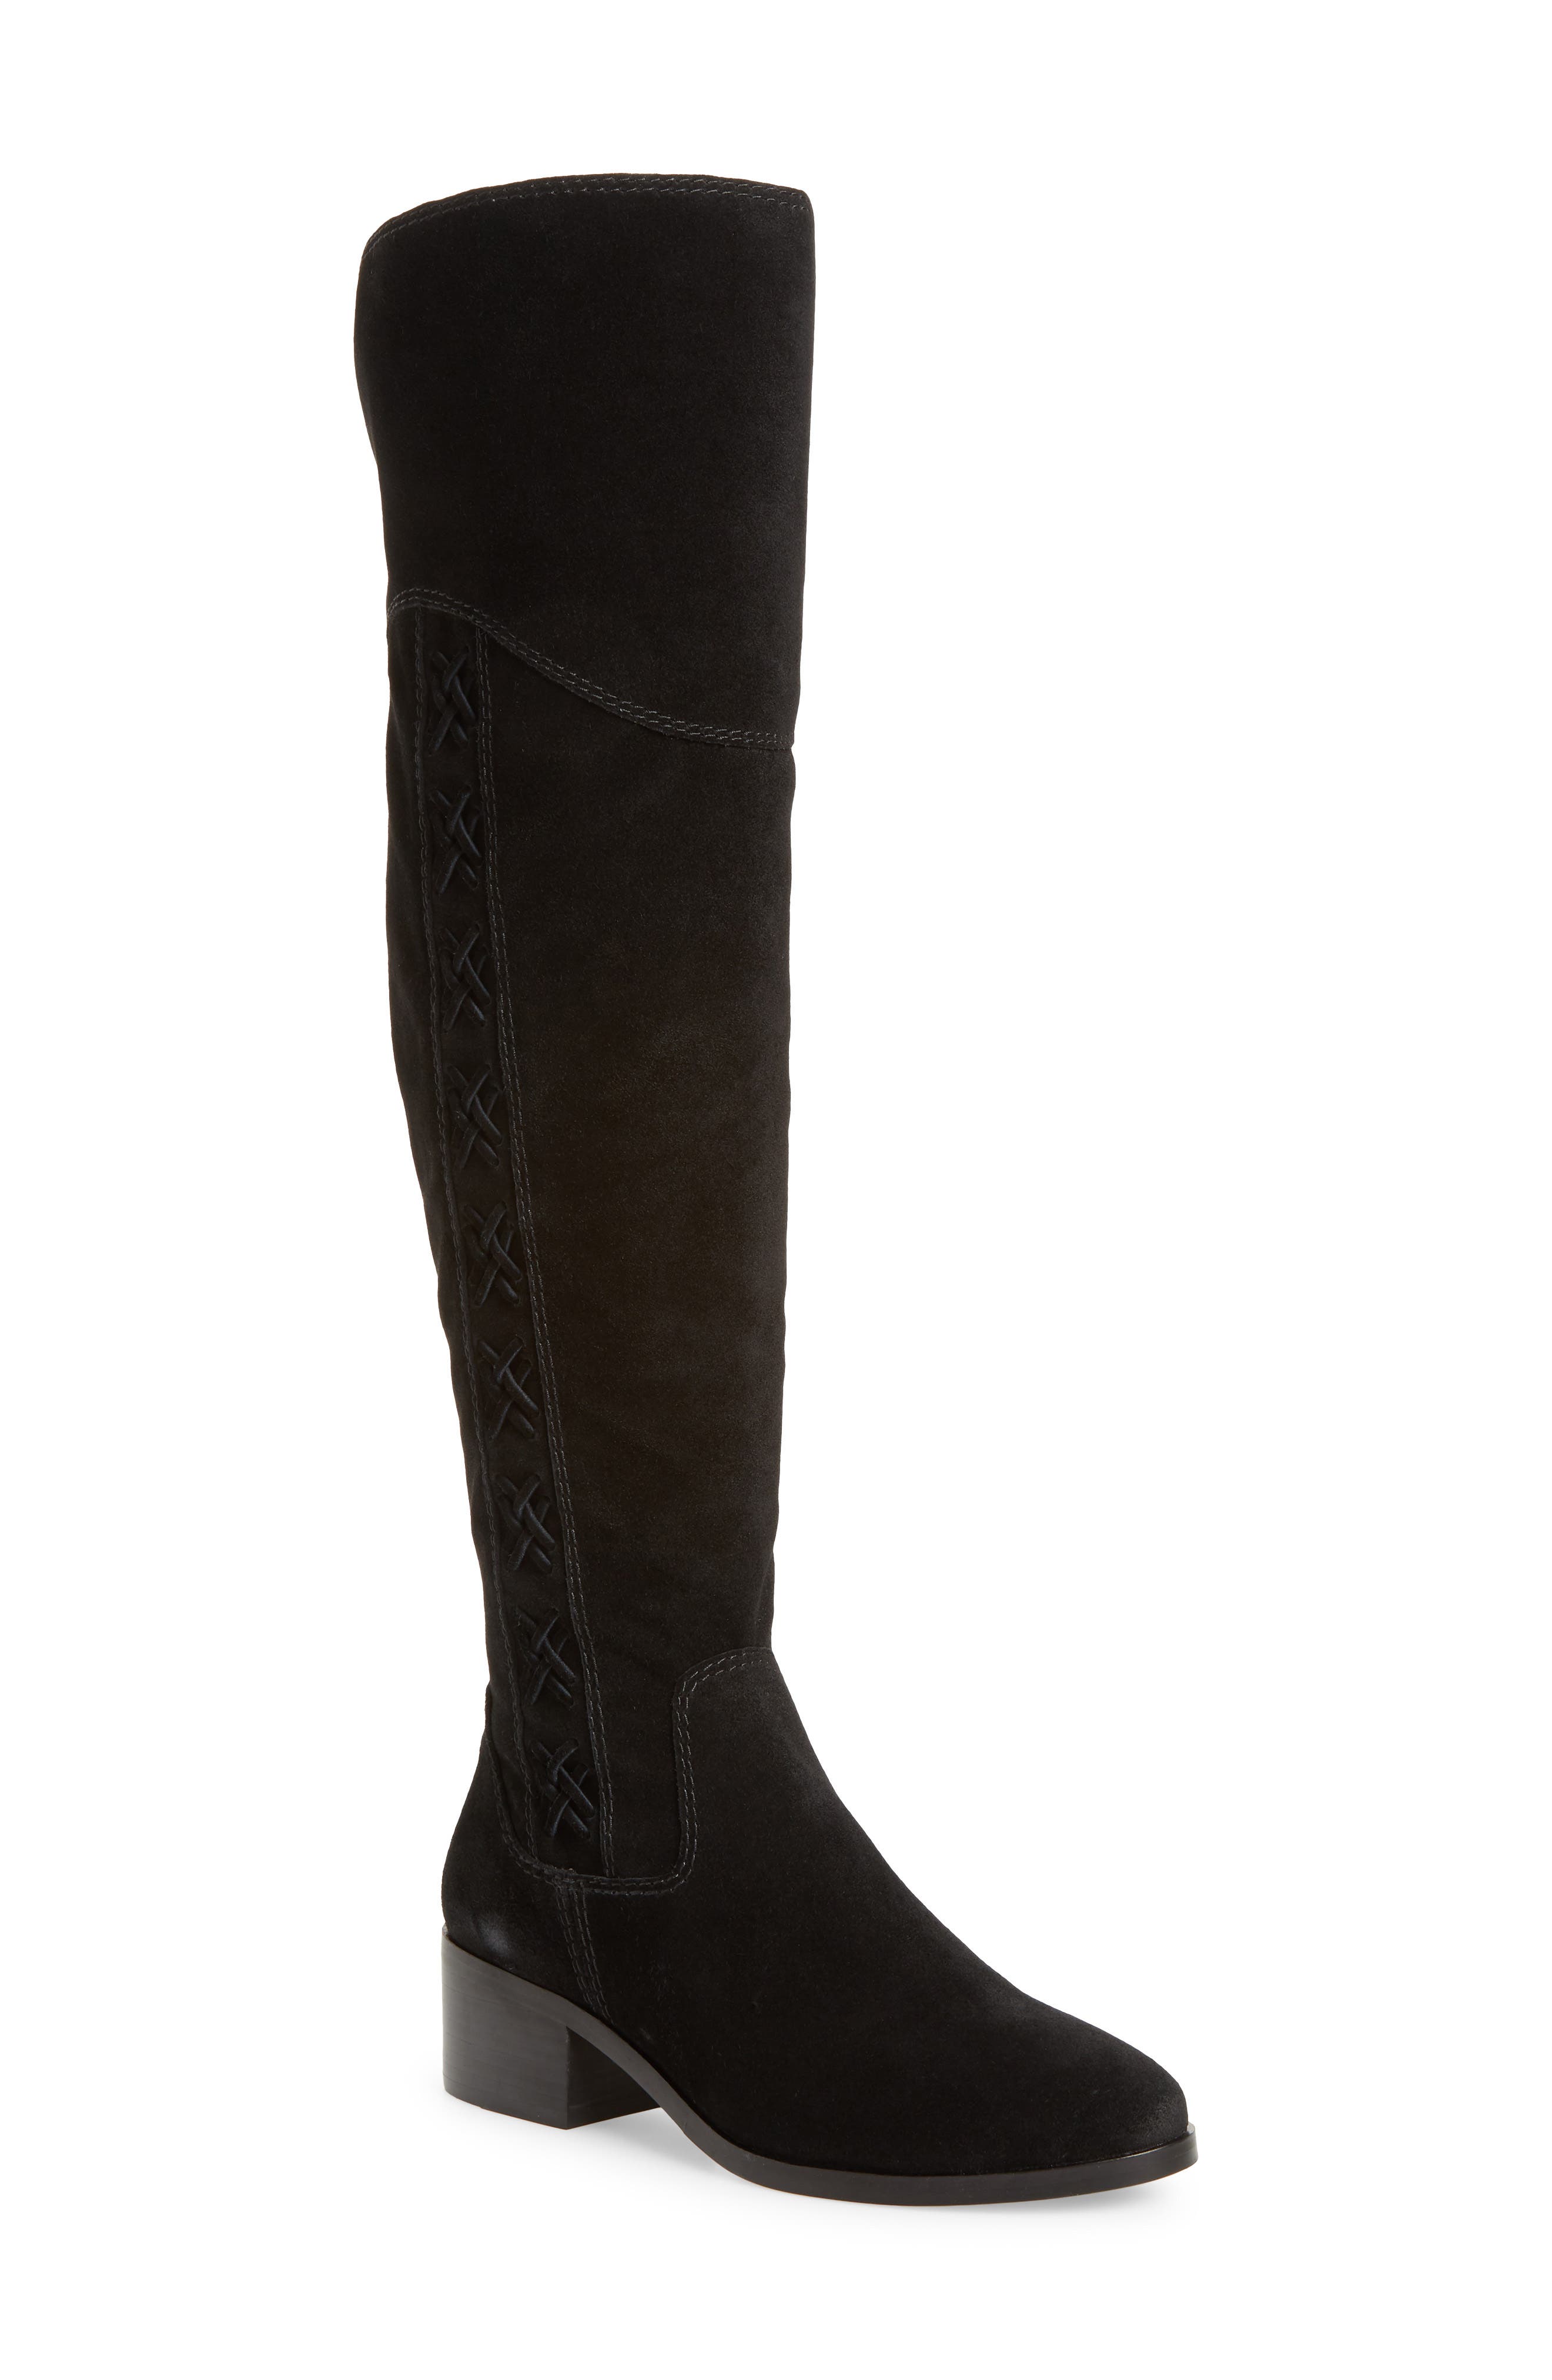 vince camuto boots wide calf